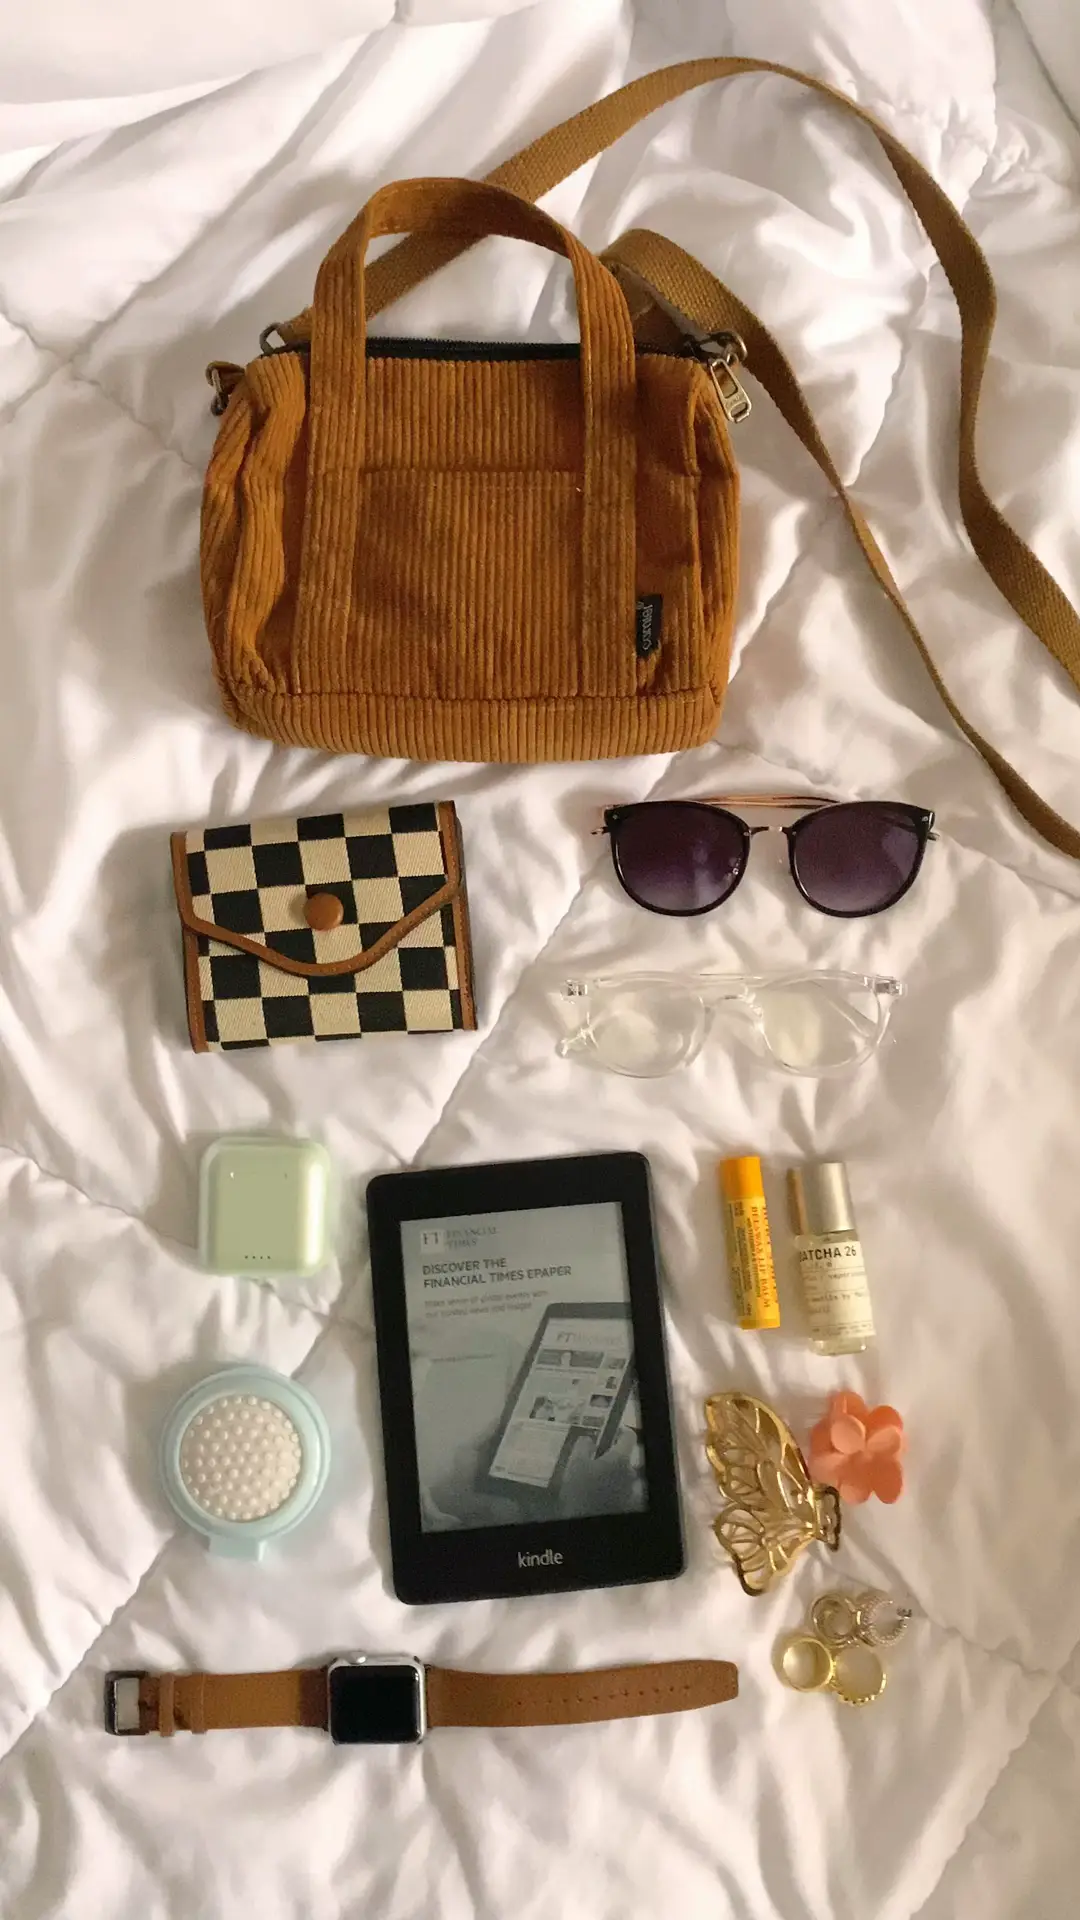 What's in my bag? ft Coach Jes Crossbody 